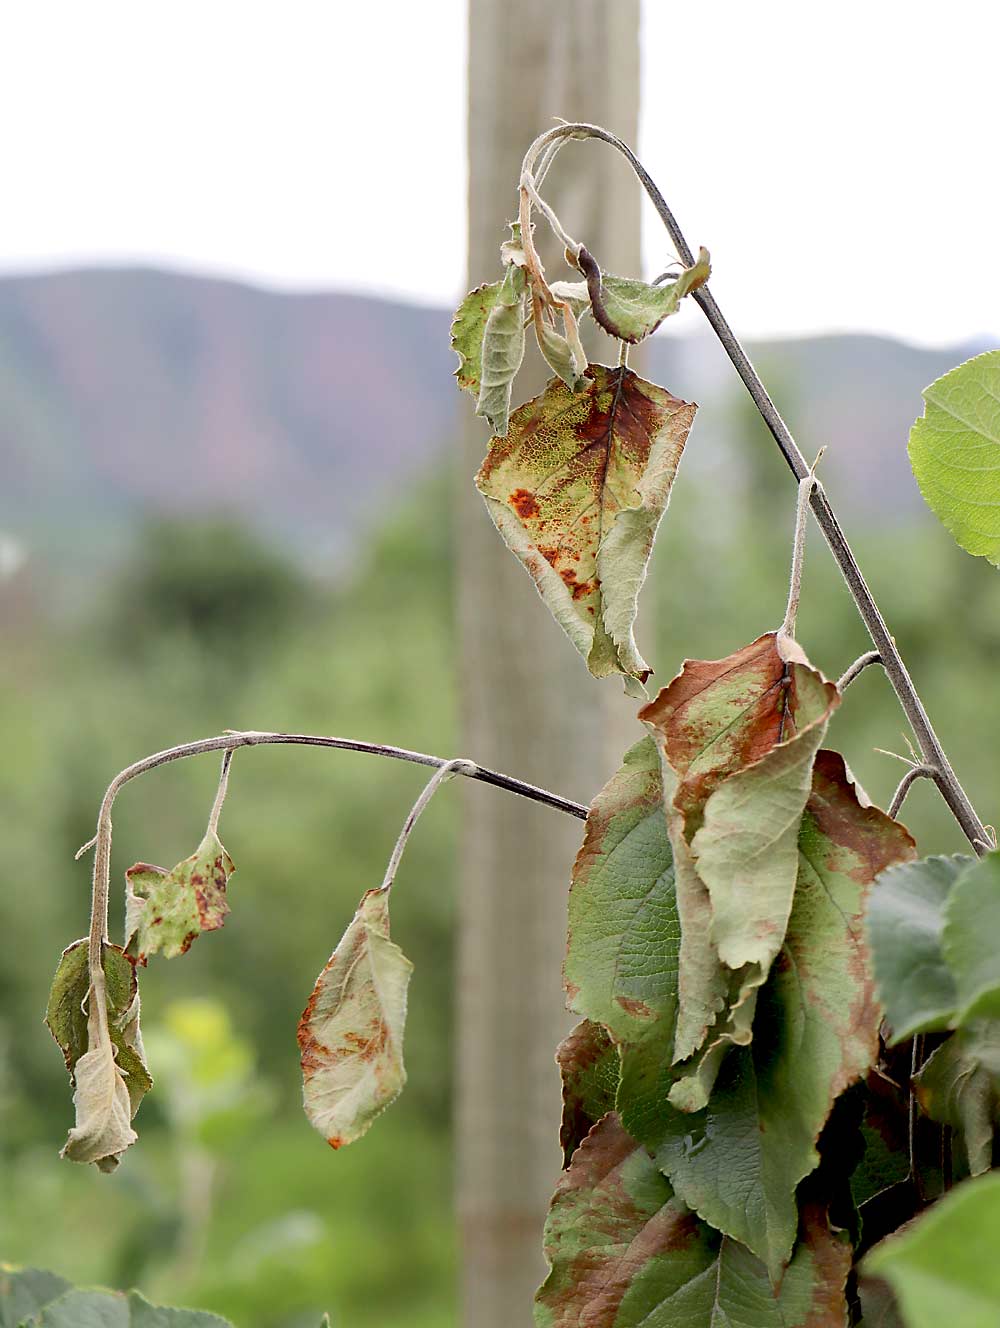 Fire blight infects an apple tree in June 2019, causing a wilting shape to shoot tips — called “shepherd’s crook” — and blackening along the midrib and veins of leaves. (Courtesy Tianna DuPont/Washington State University)